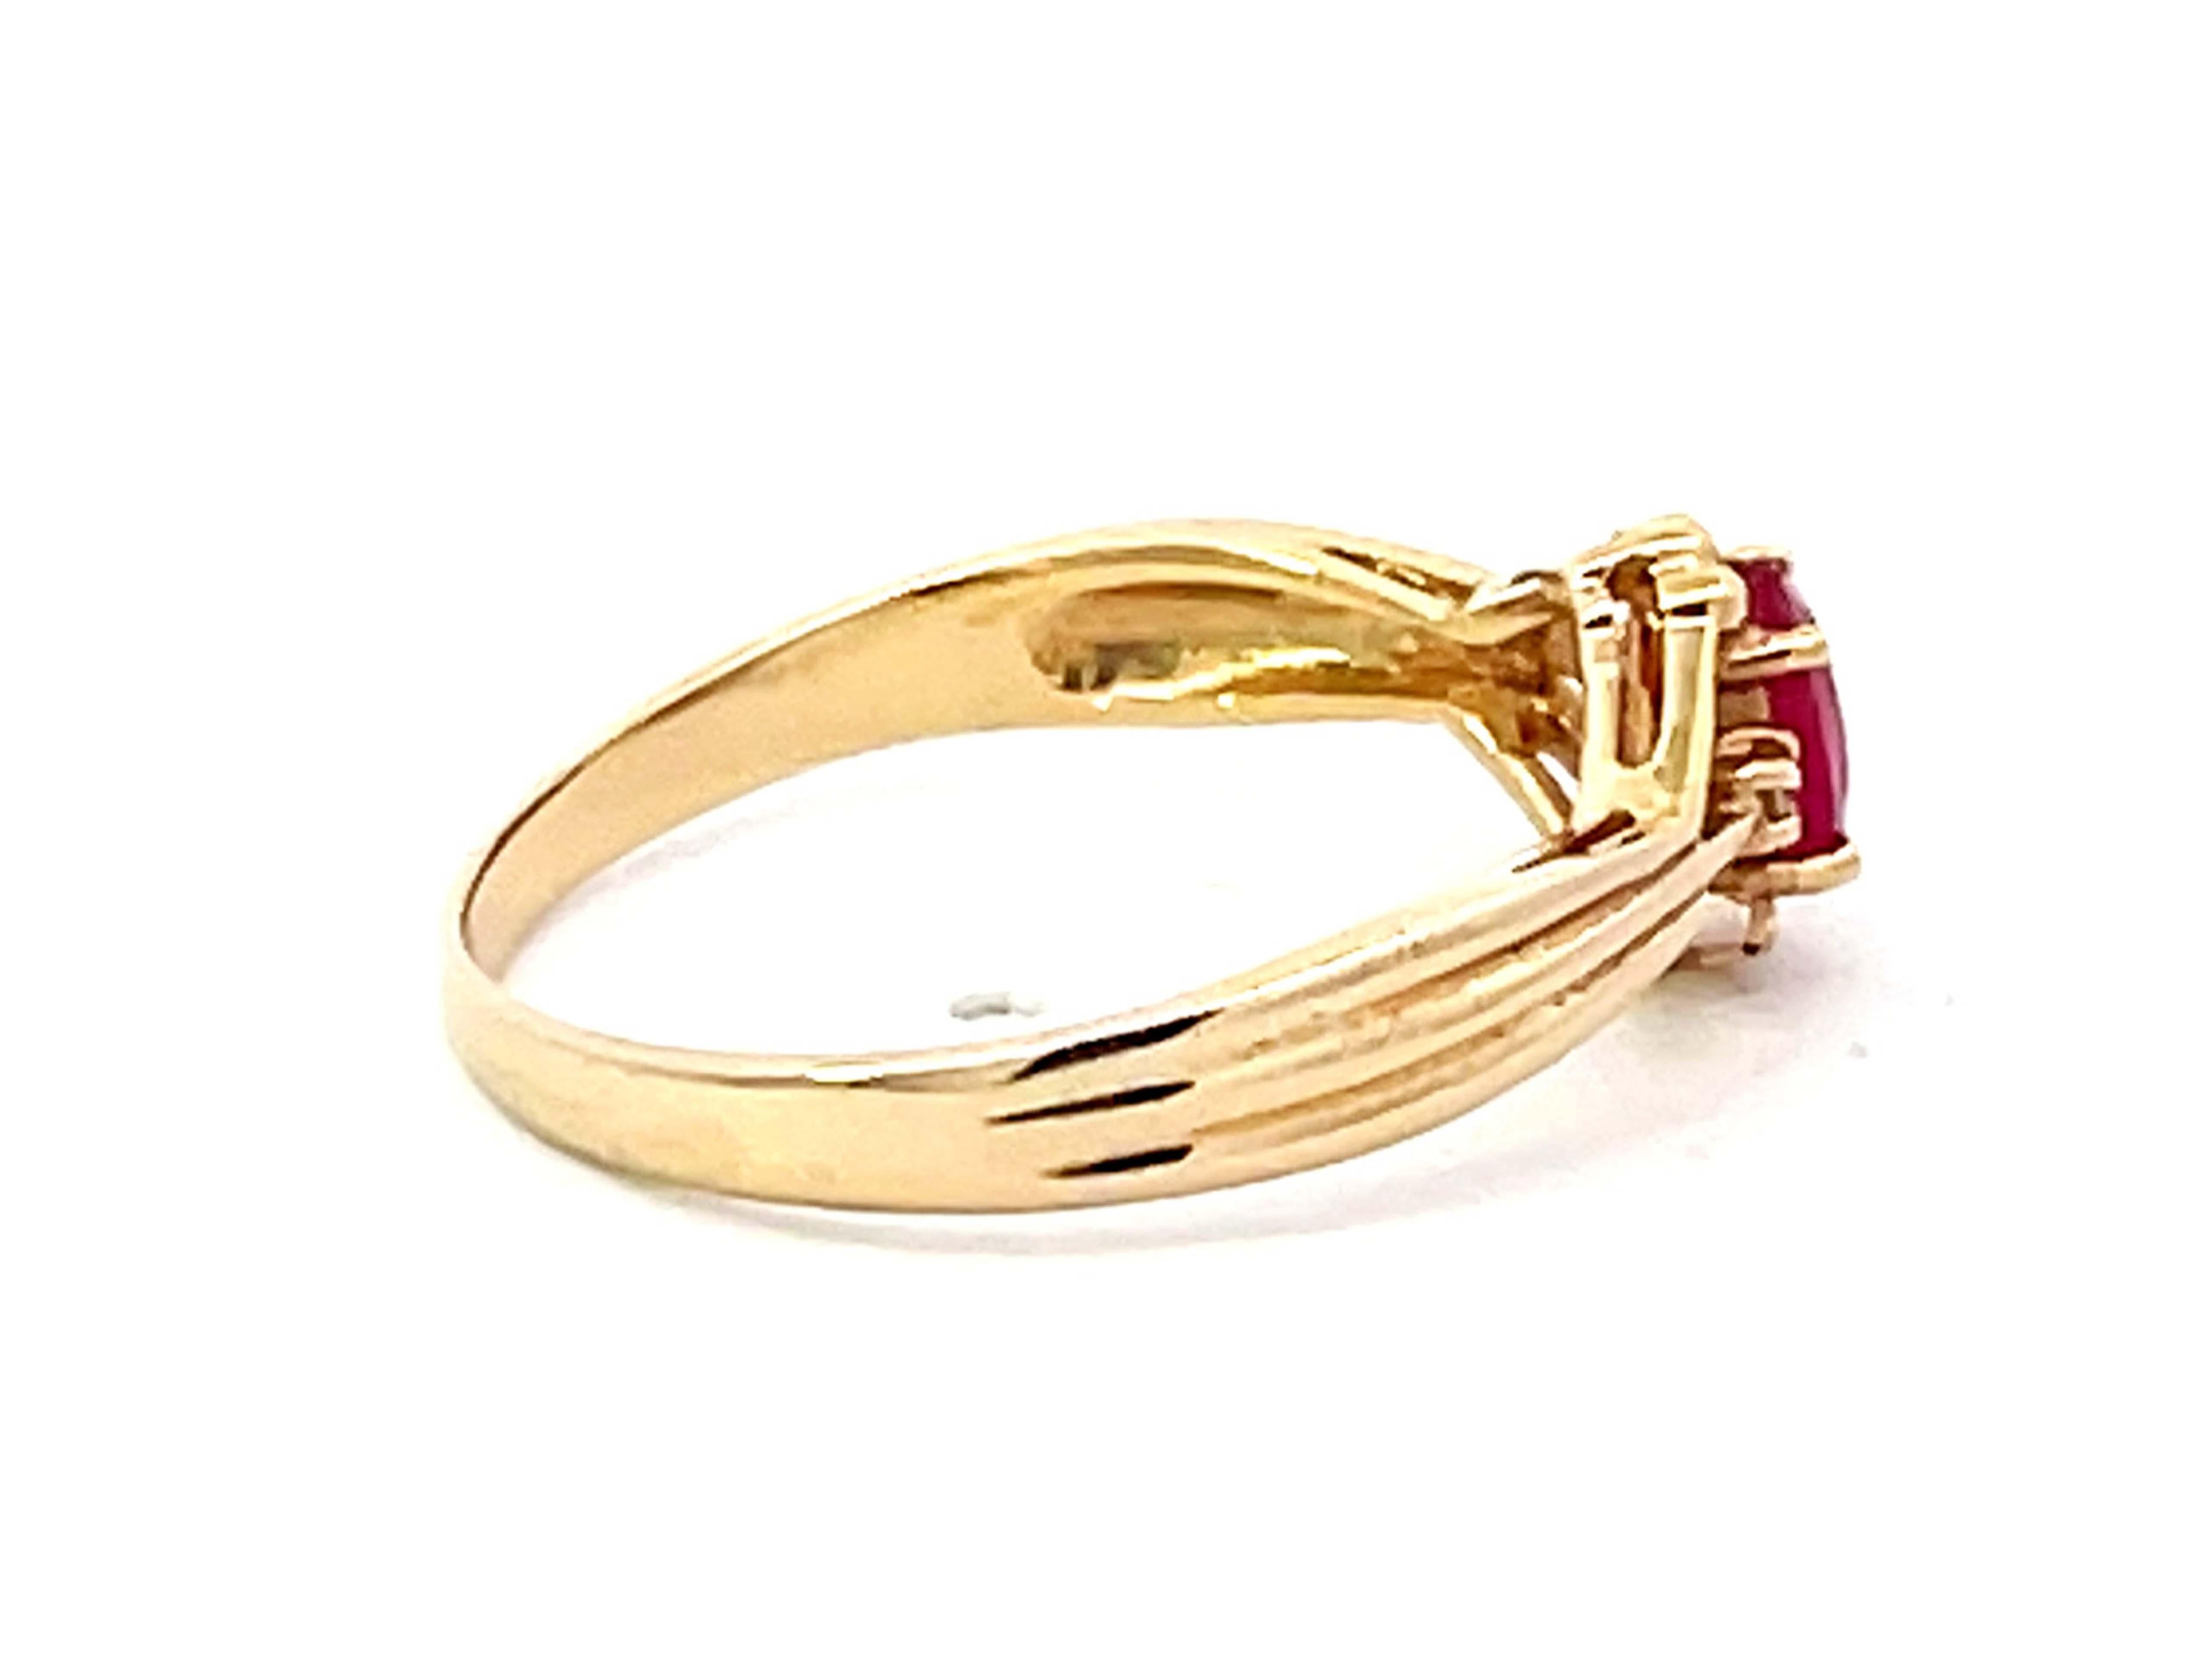 Oval Red Ruby Diamond Ring in 14k Yellow Gold In Excellent Condition For Sale In Honolulu, HI